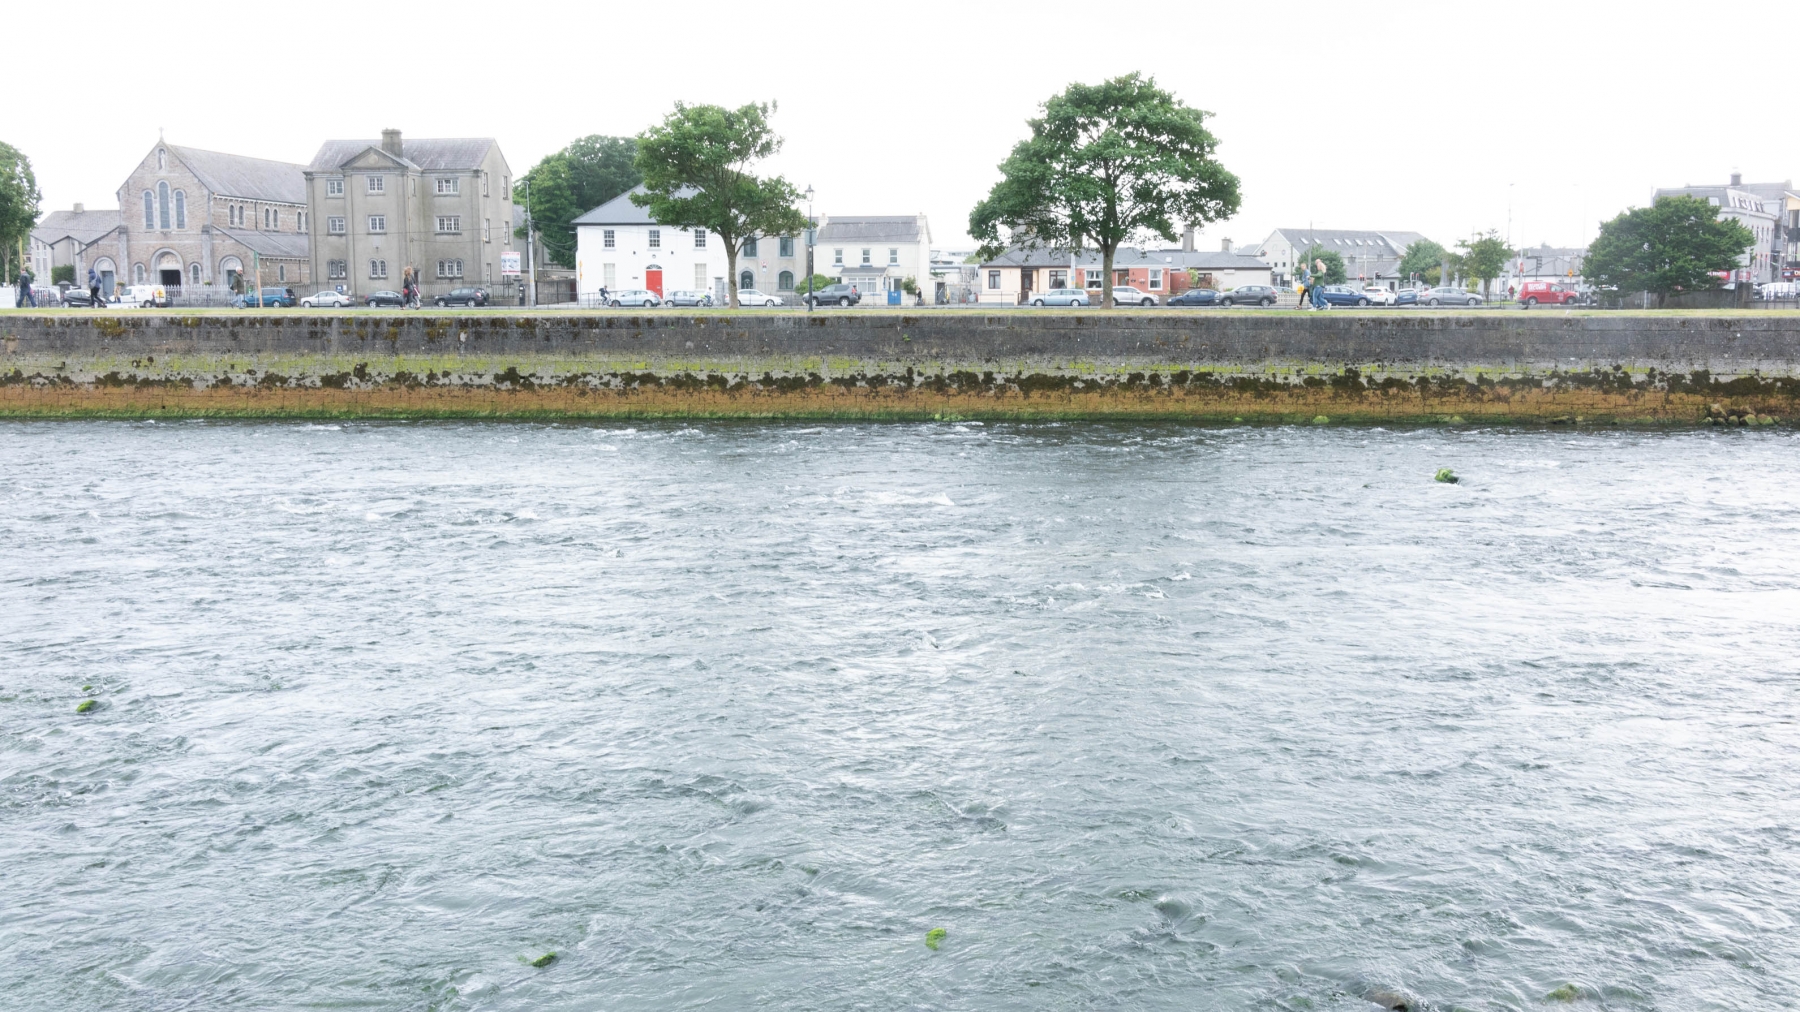 On rainy days, head for the nearest town. Here's Galway, the third biggest city in Ireland (after Dublin and Cork).